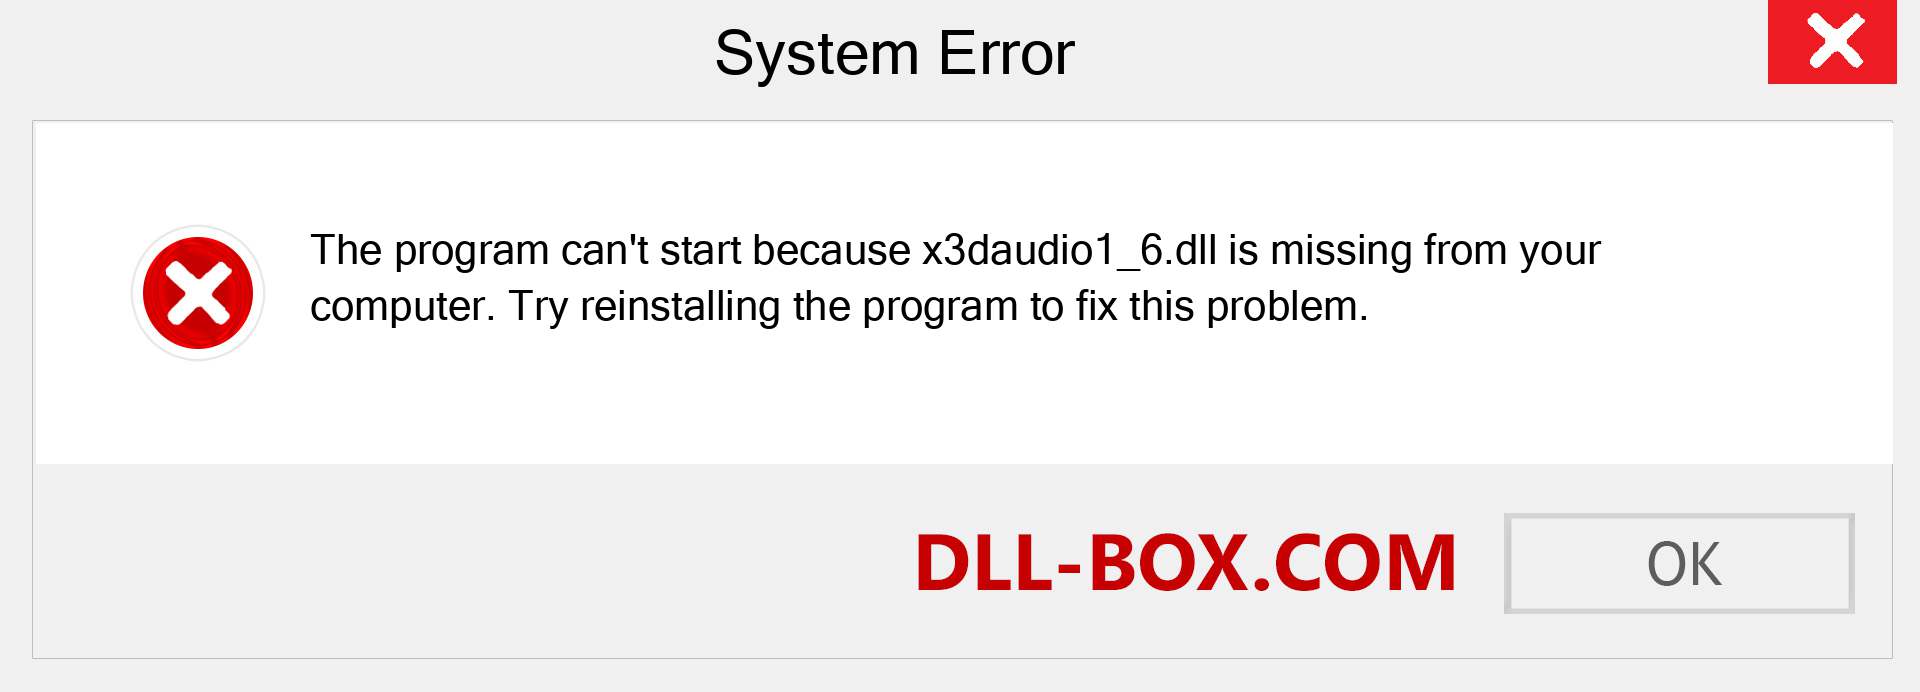  x3daudio1_6.dll file is missing?. Download for Windows 7, 8, 10 - Fix  x3daudio1_6 dll Missing Error on Windows, photos, images